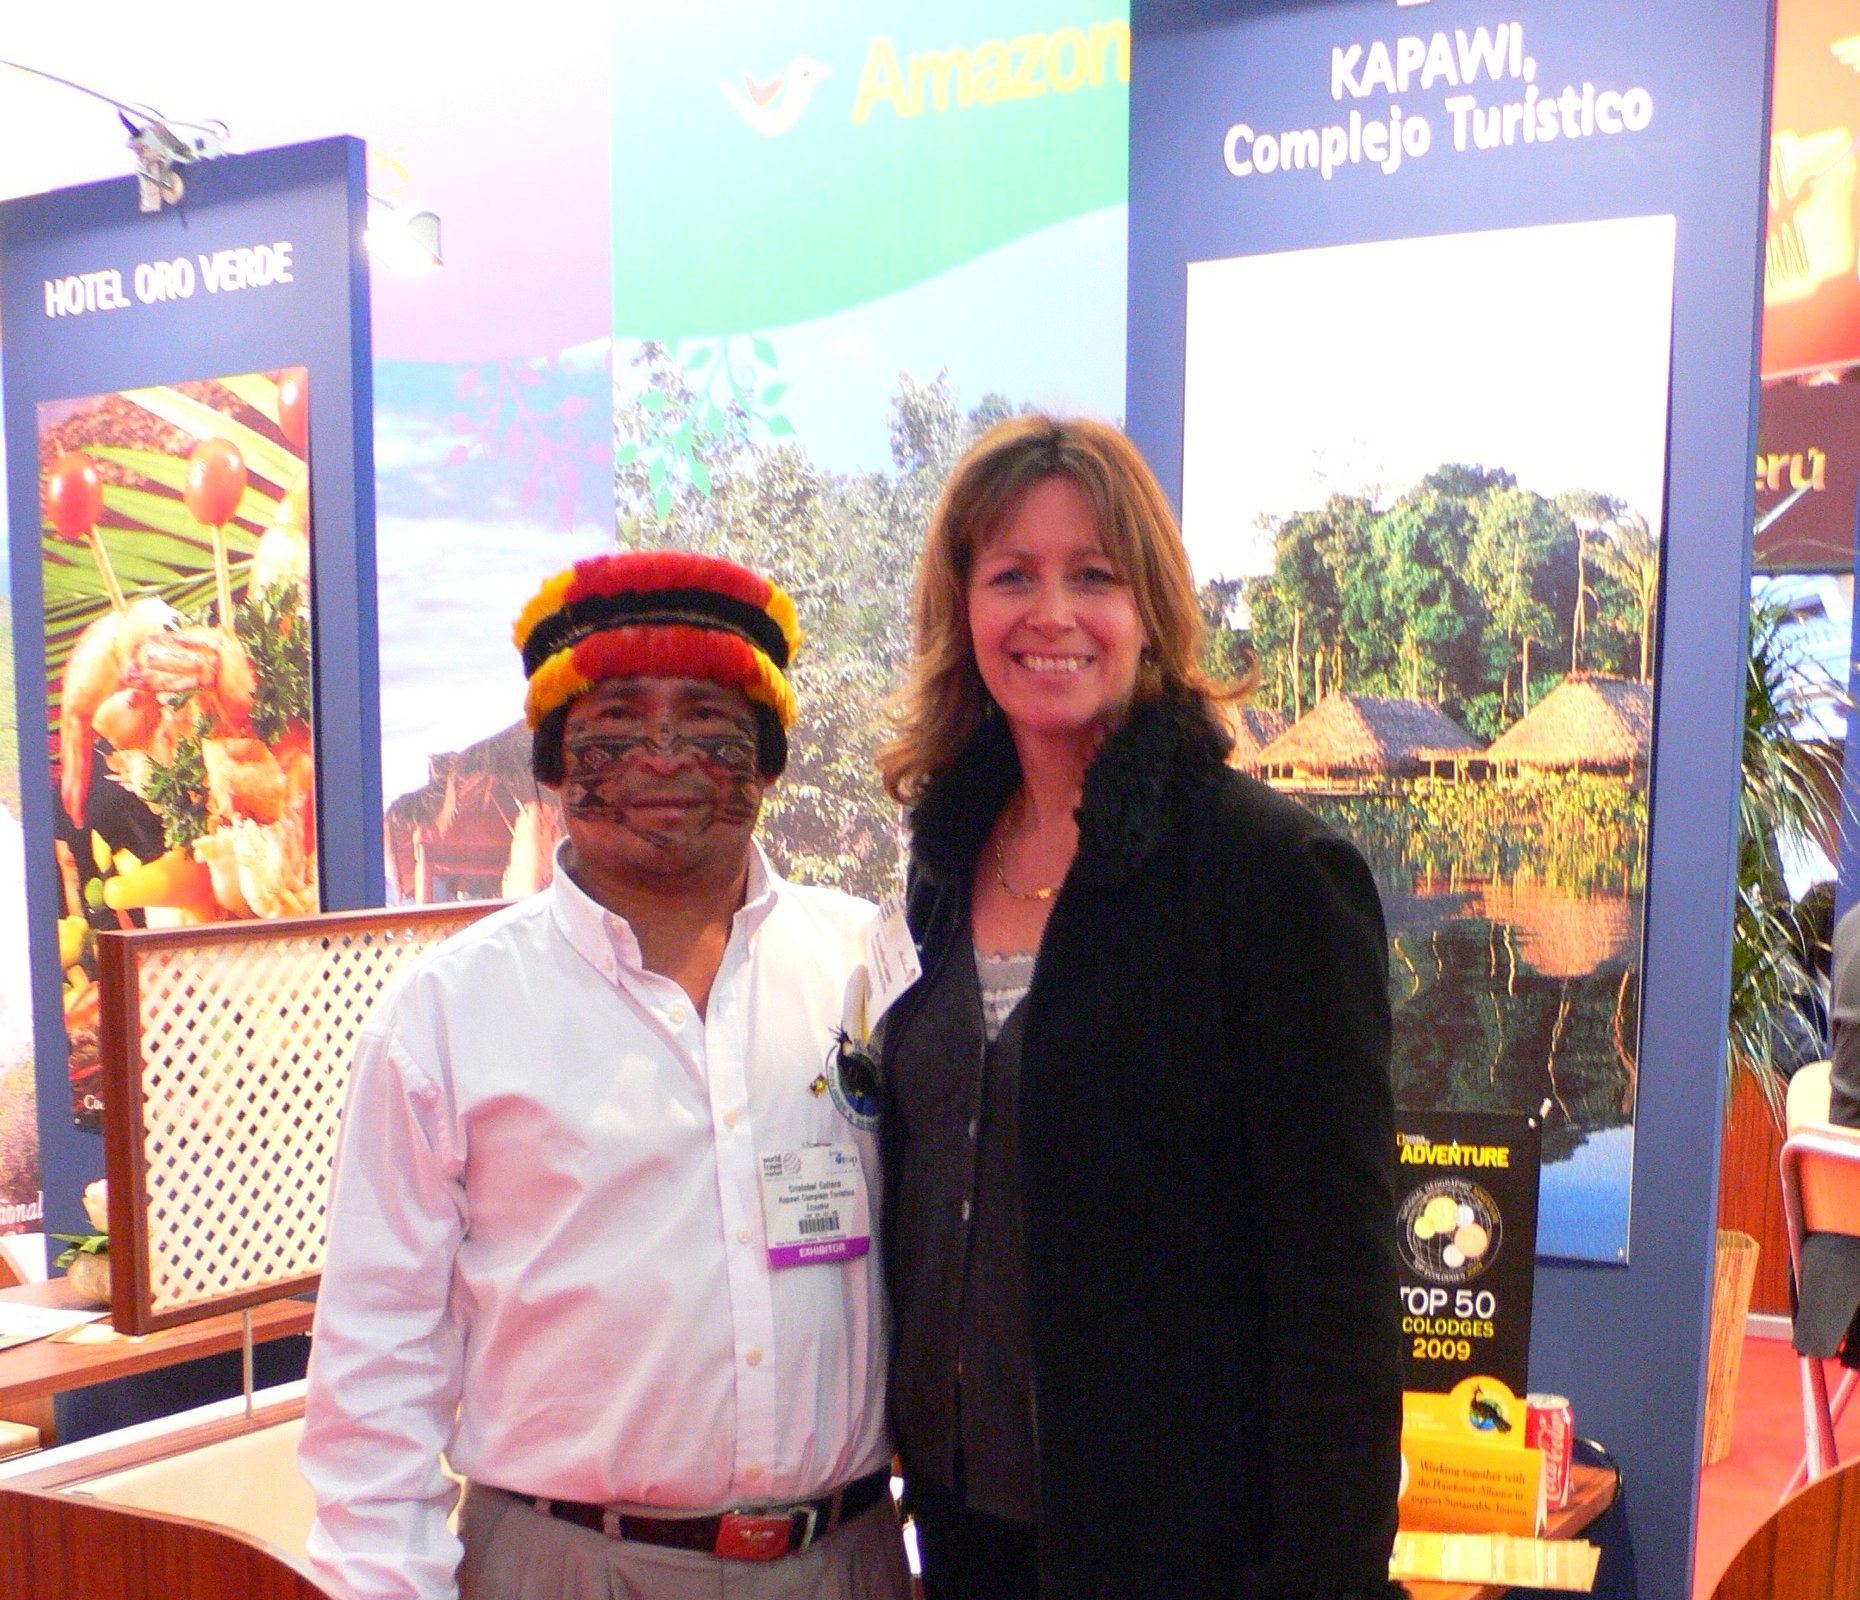 On the Kapawi stand at the World Travel Market, London